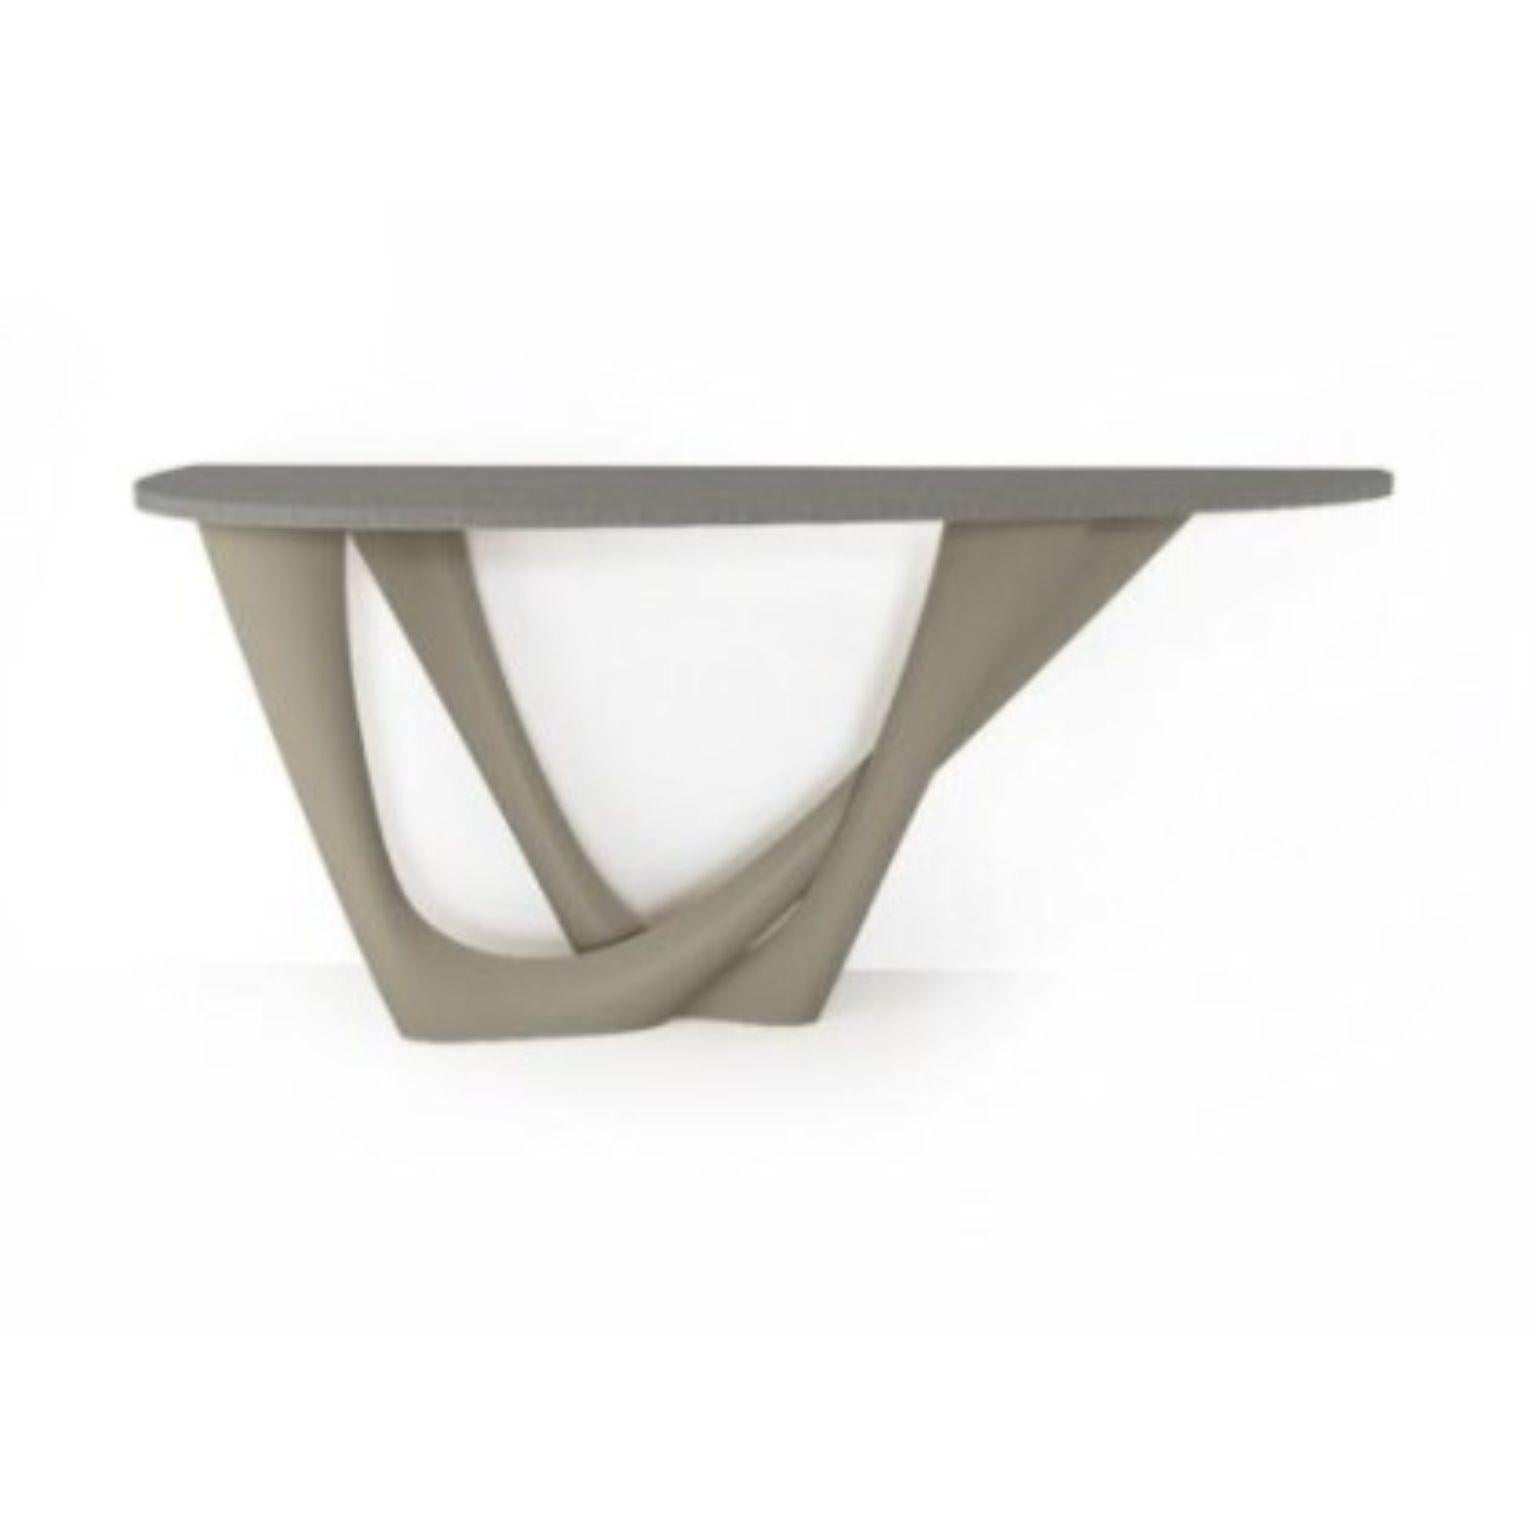 Stone Grey G-Console Duo concrete top and steel base by Zieta
Dimensions: D 56 x W 168 x H 75 cm 
Material: Carbon steel, concrete.
Also available in different colors and dimensions.

G-Console is another bionic object in our collection. Created for